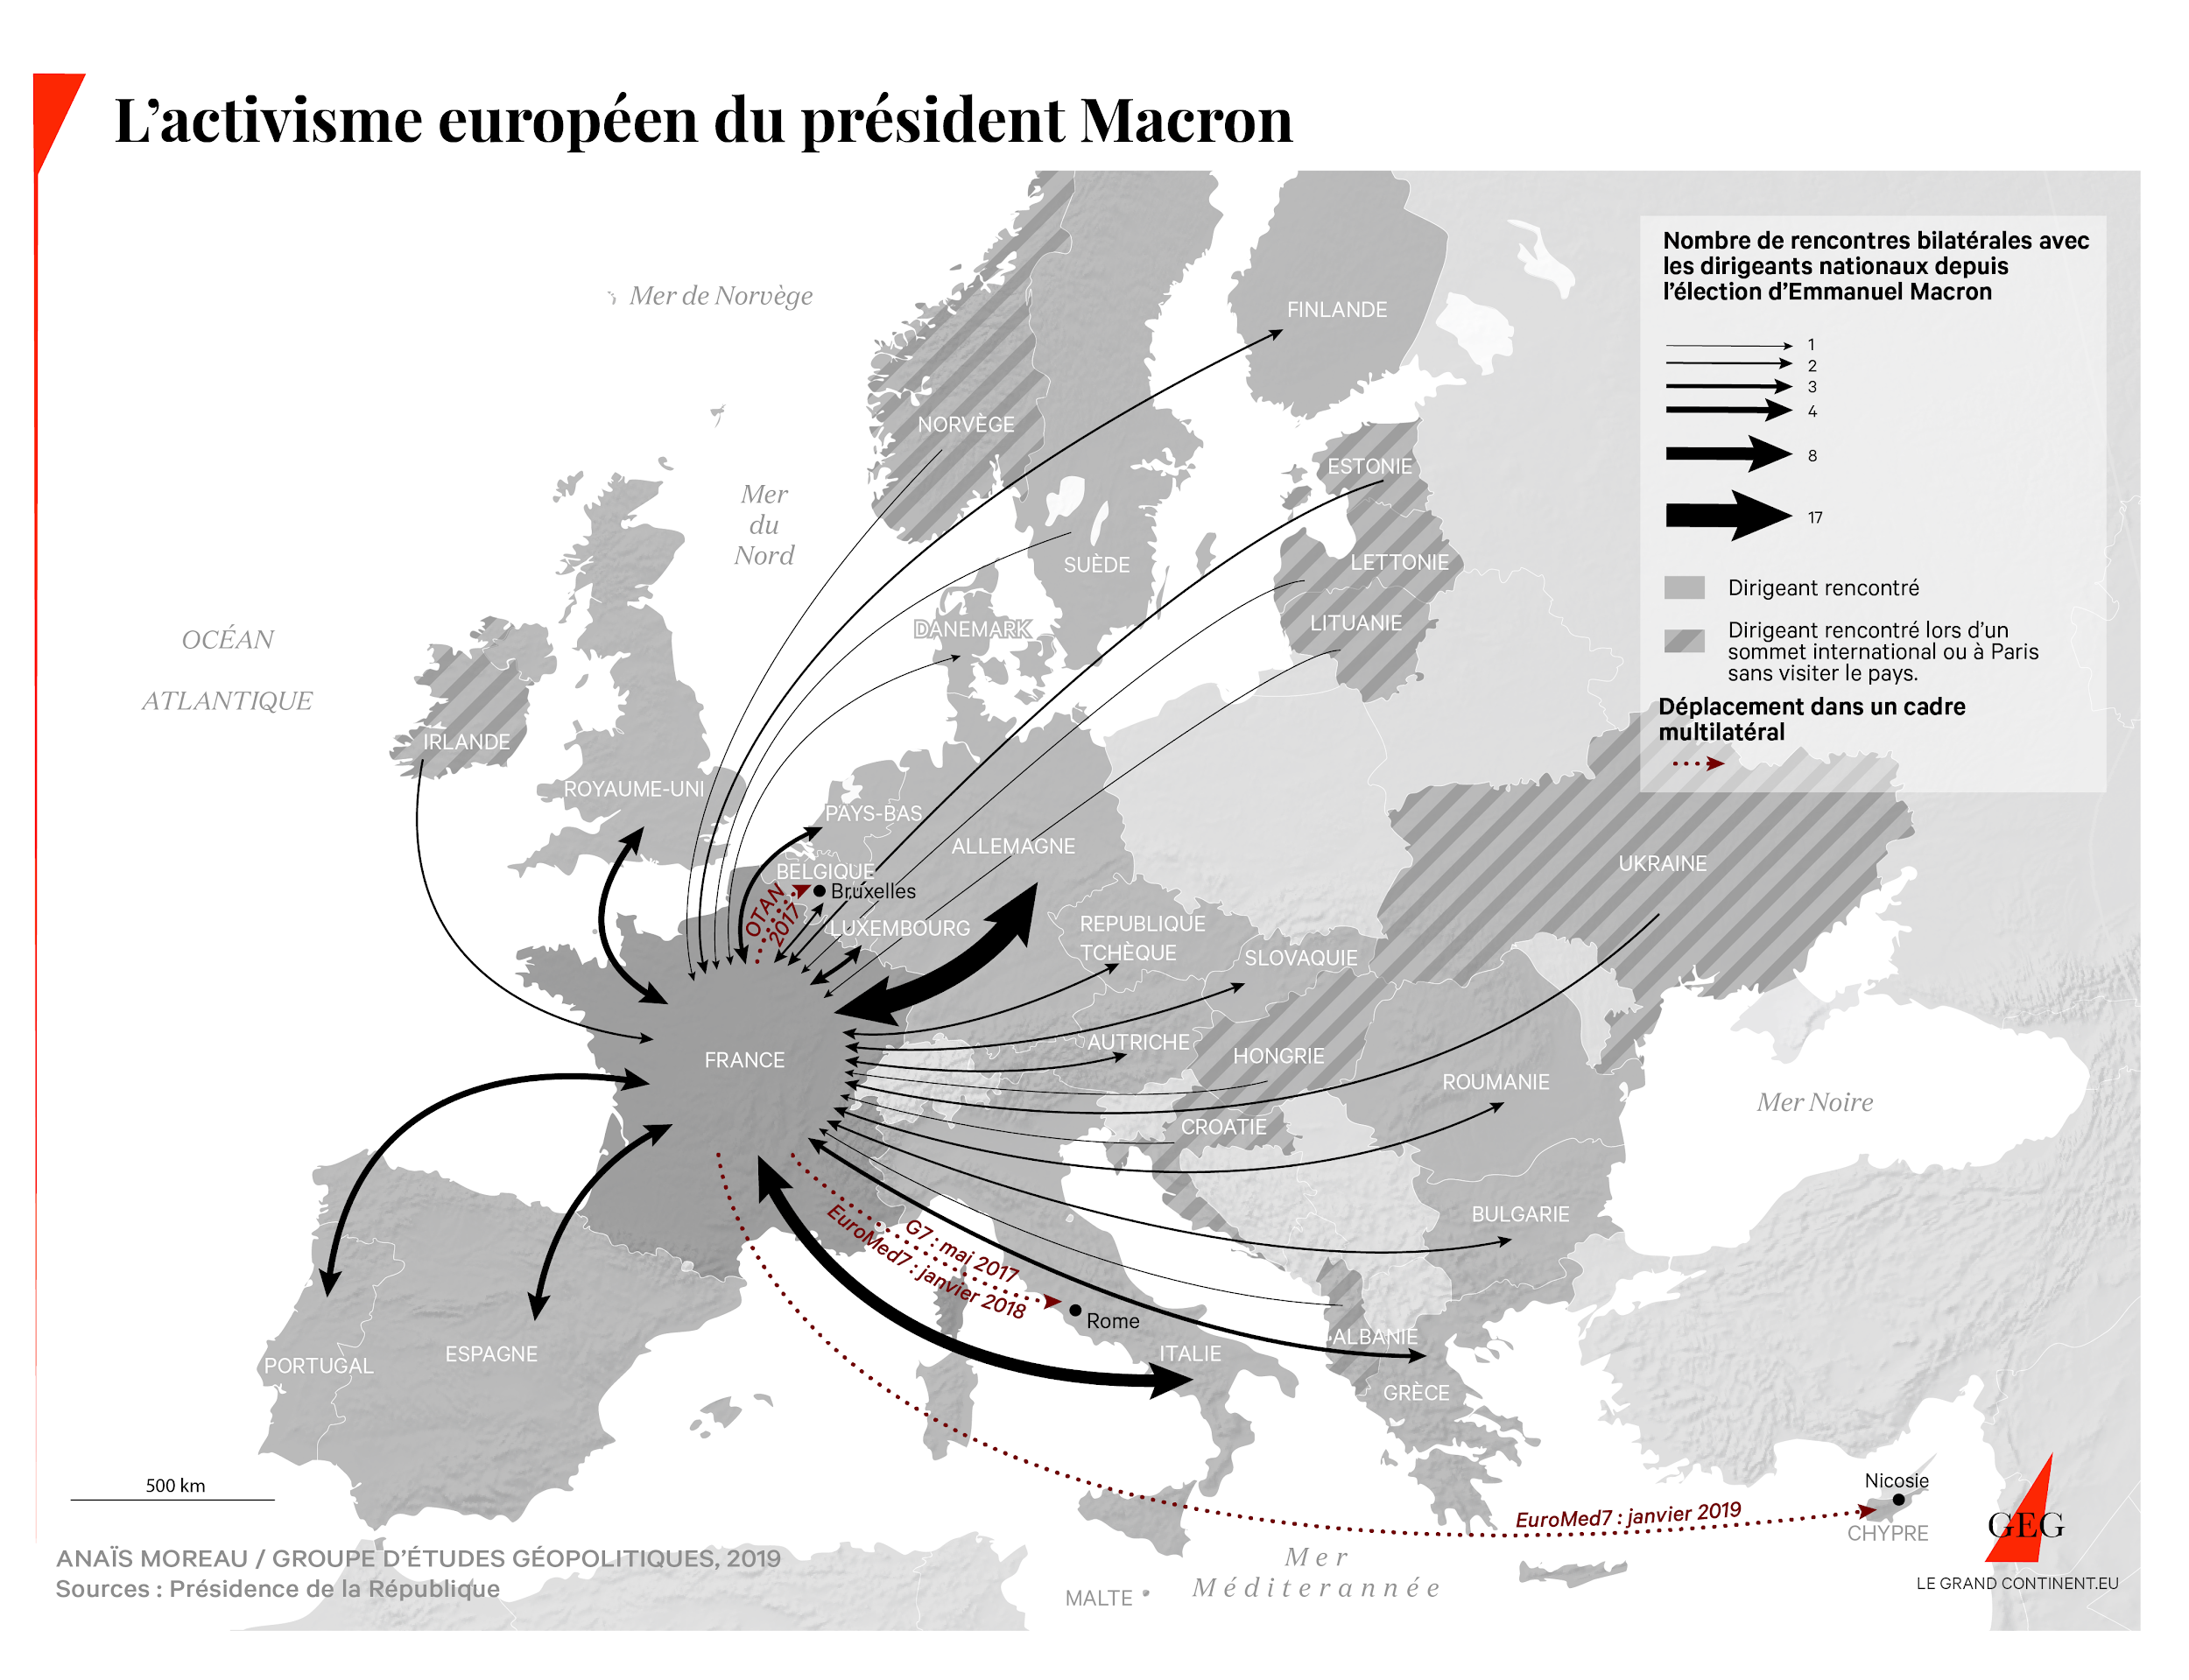 Map of President Macron's European activism (no. bilateral meetings with EU countries)